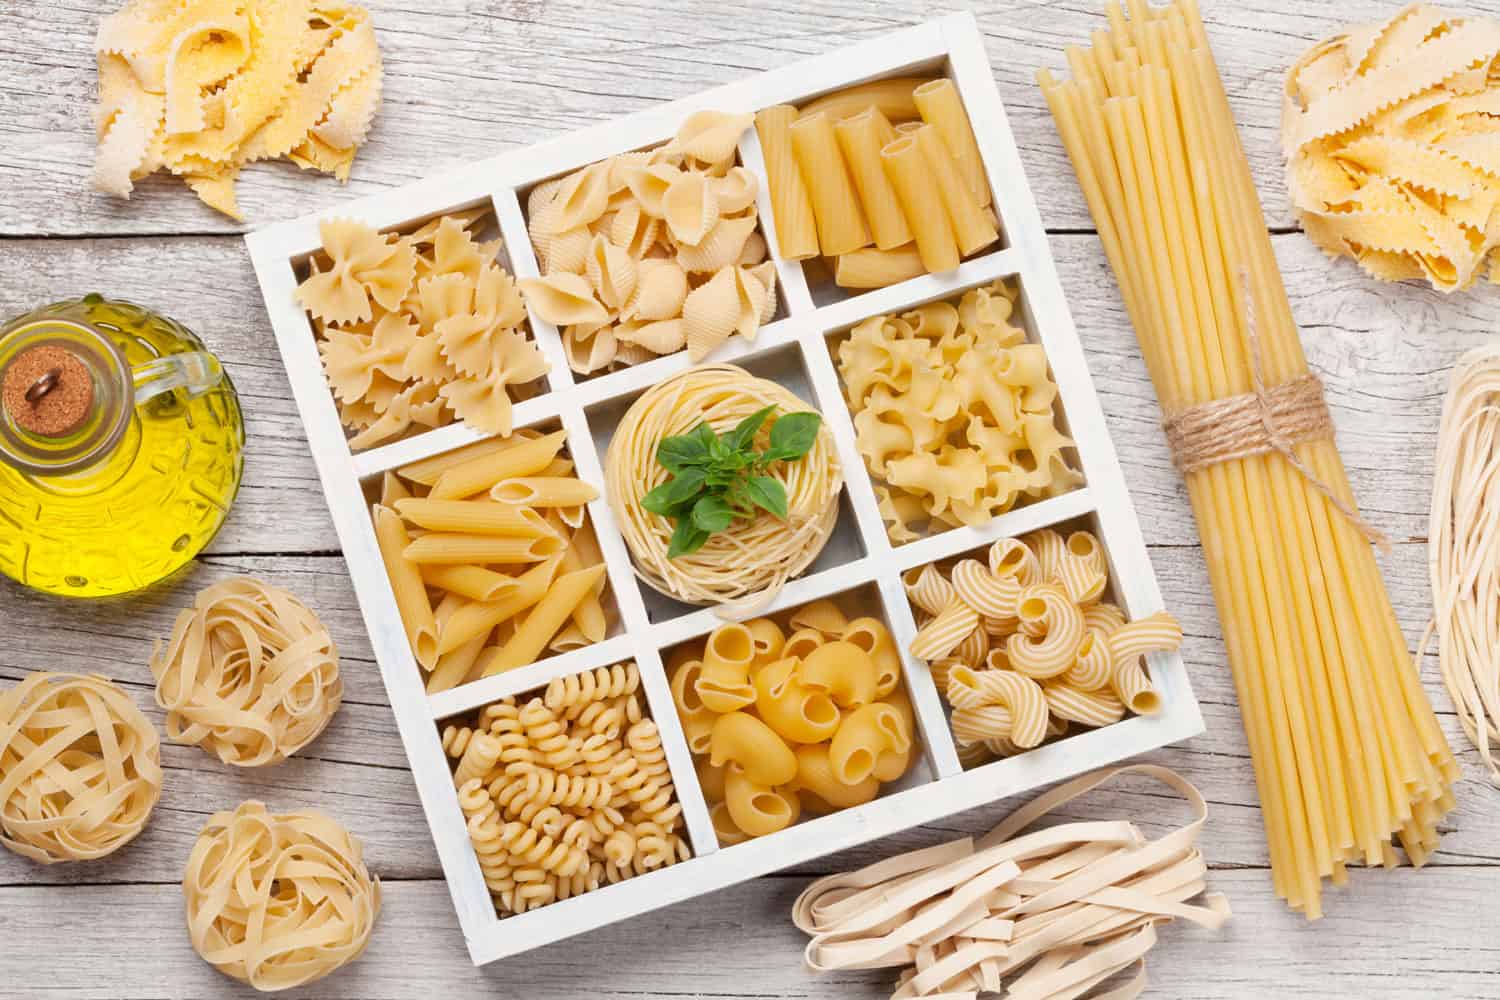 Is Eating Raw Pasta Bad? 